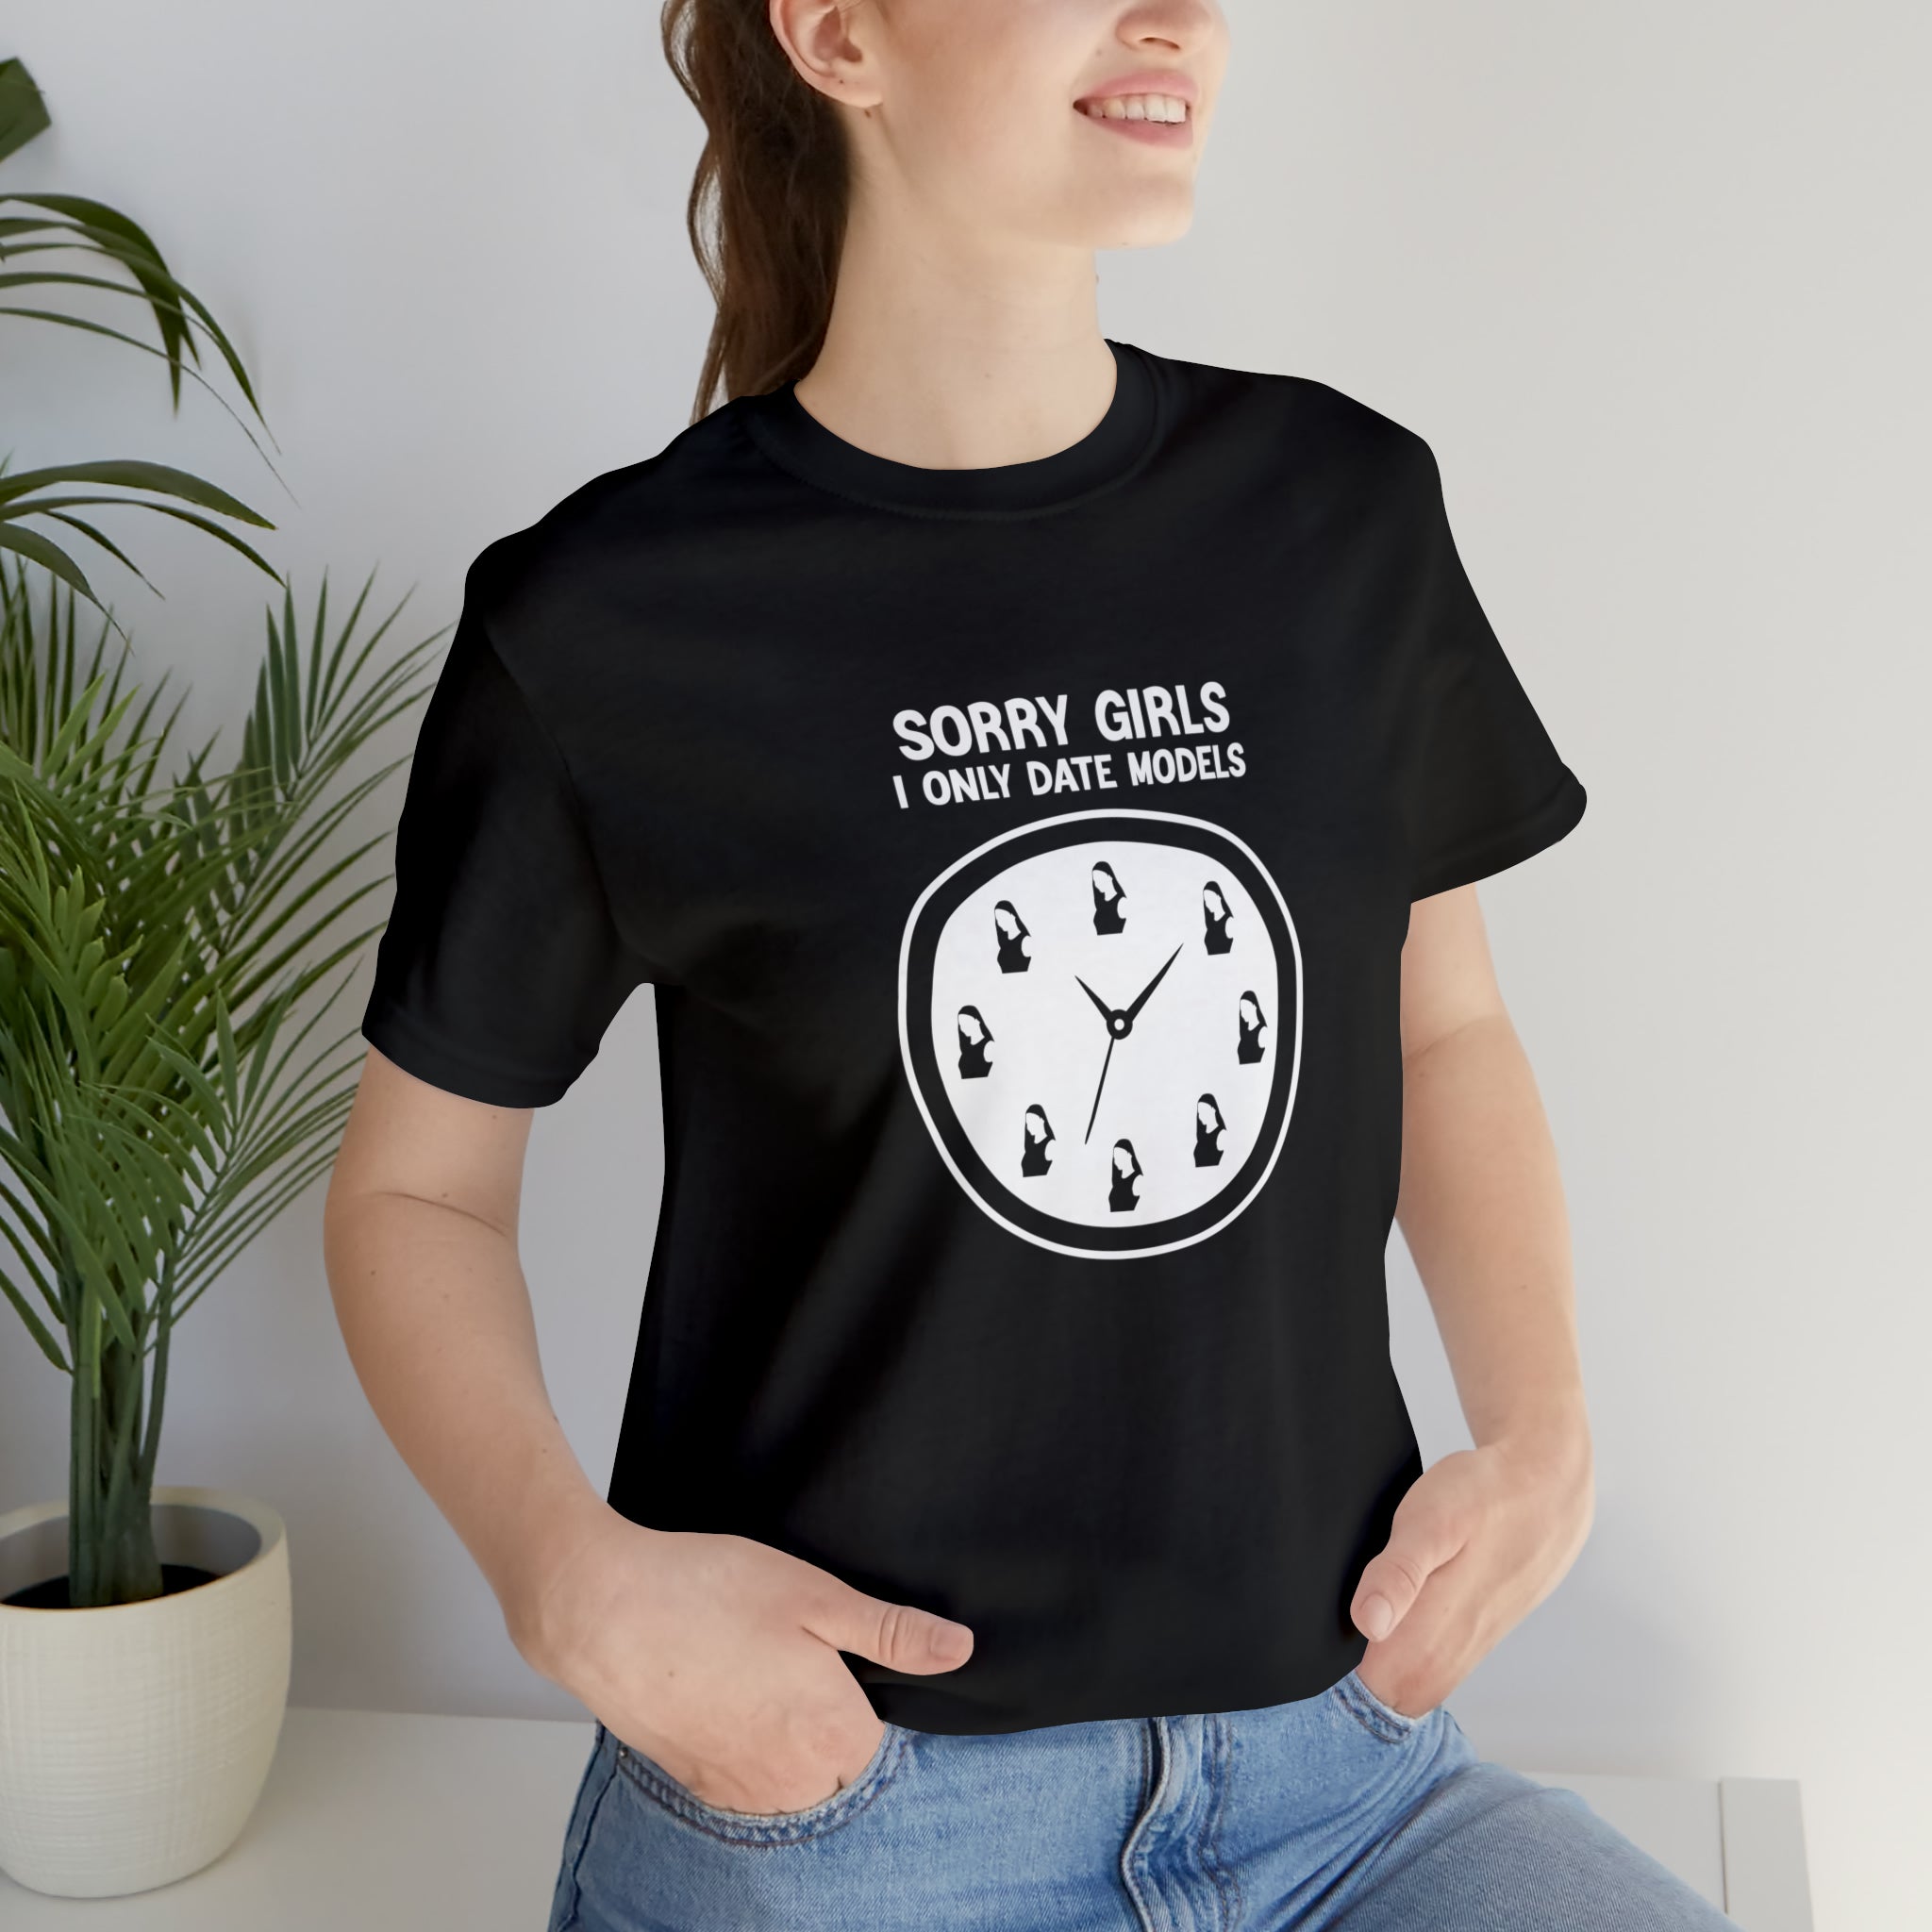 A stylish woman wearing a black "Sorry Girls I Only Date Models" t-shirt with a bold statement print that says sorry girls don't like clocks.